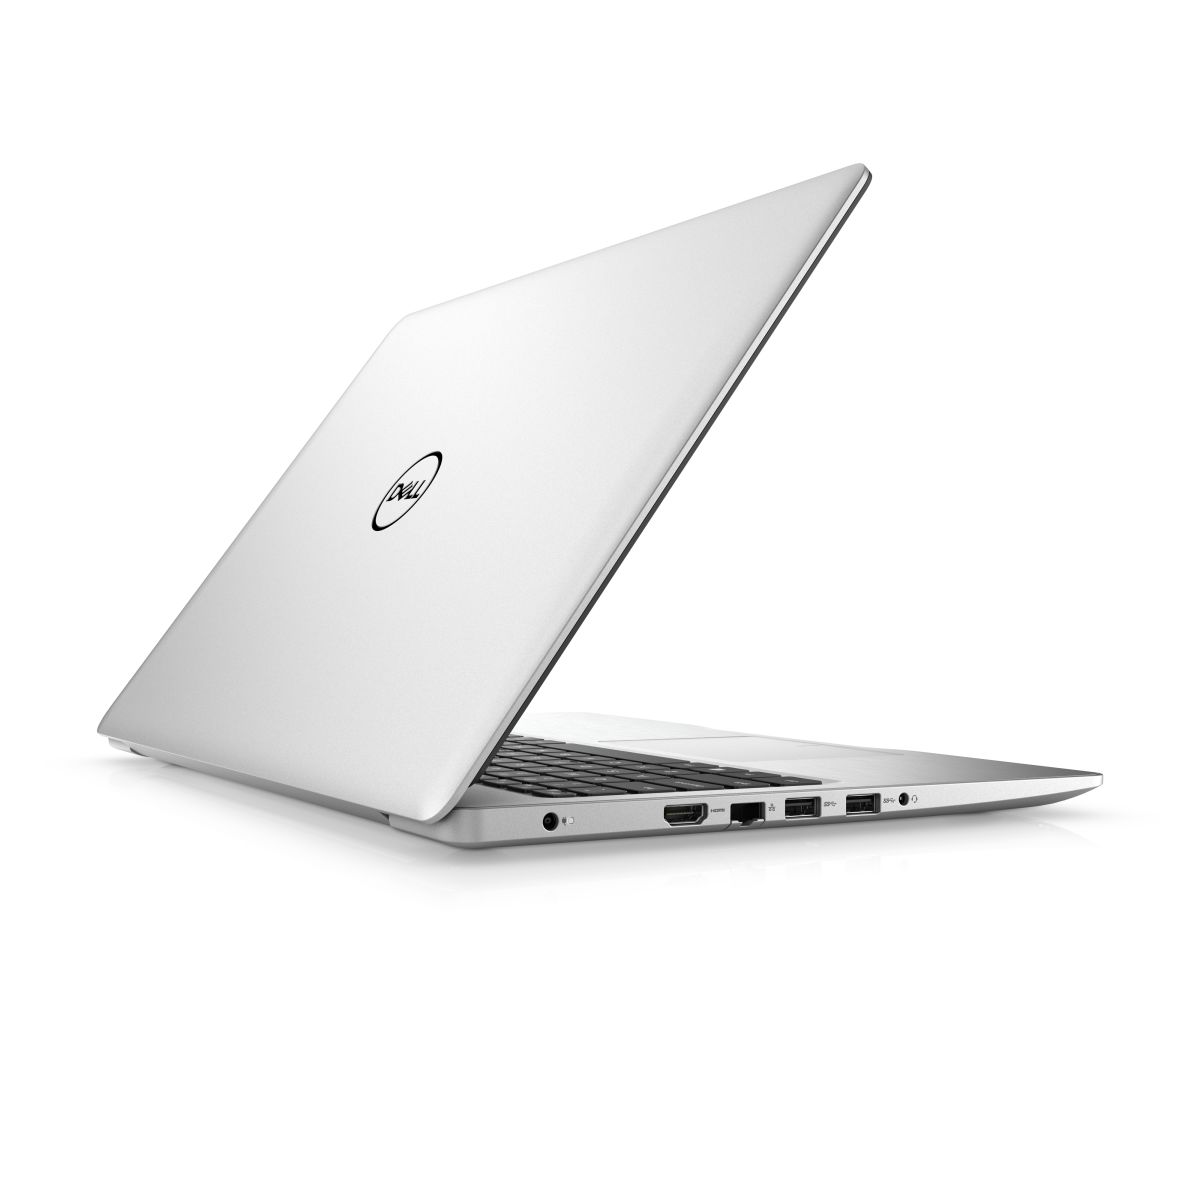 DELL Inspiron 5570 - 5570-INS-1121-GGRY laptop specifications